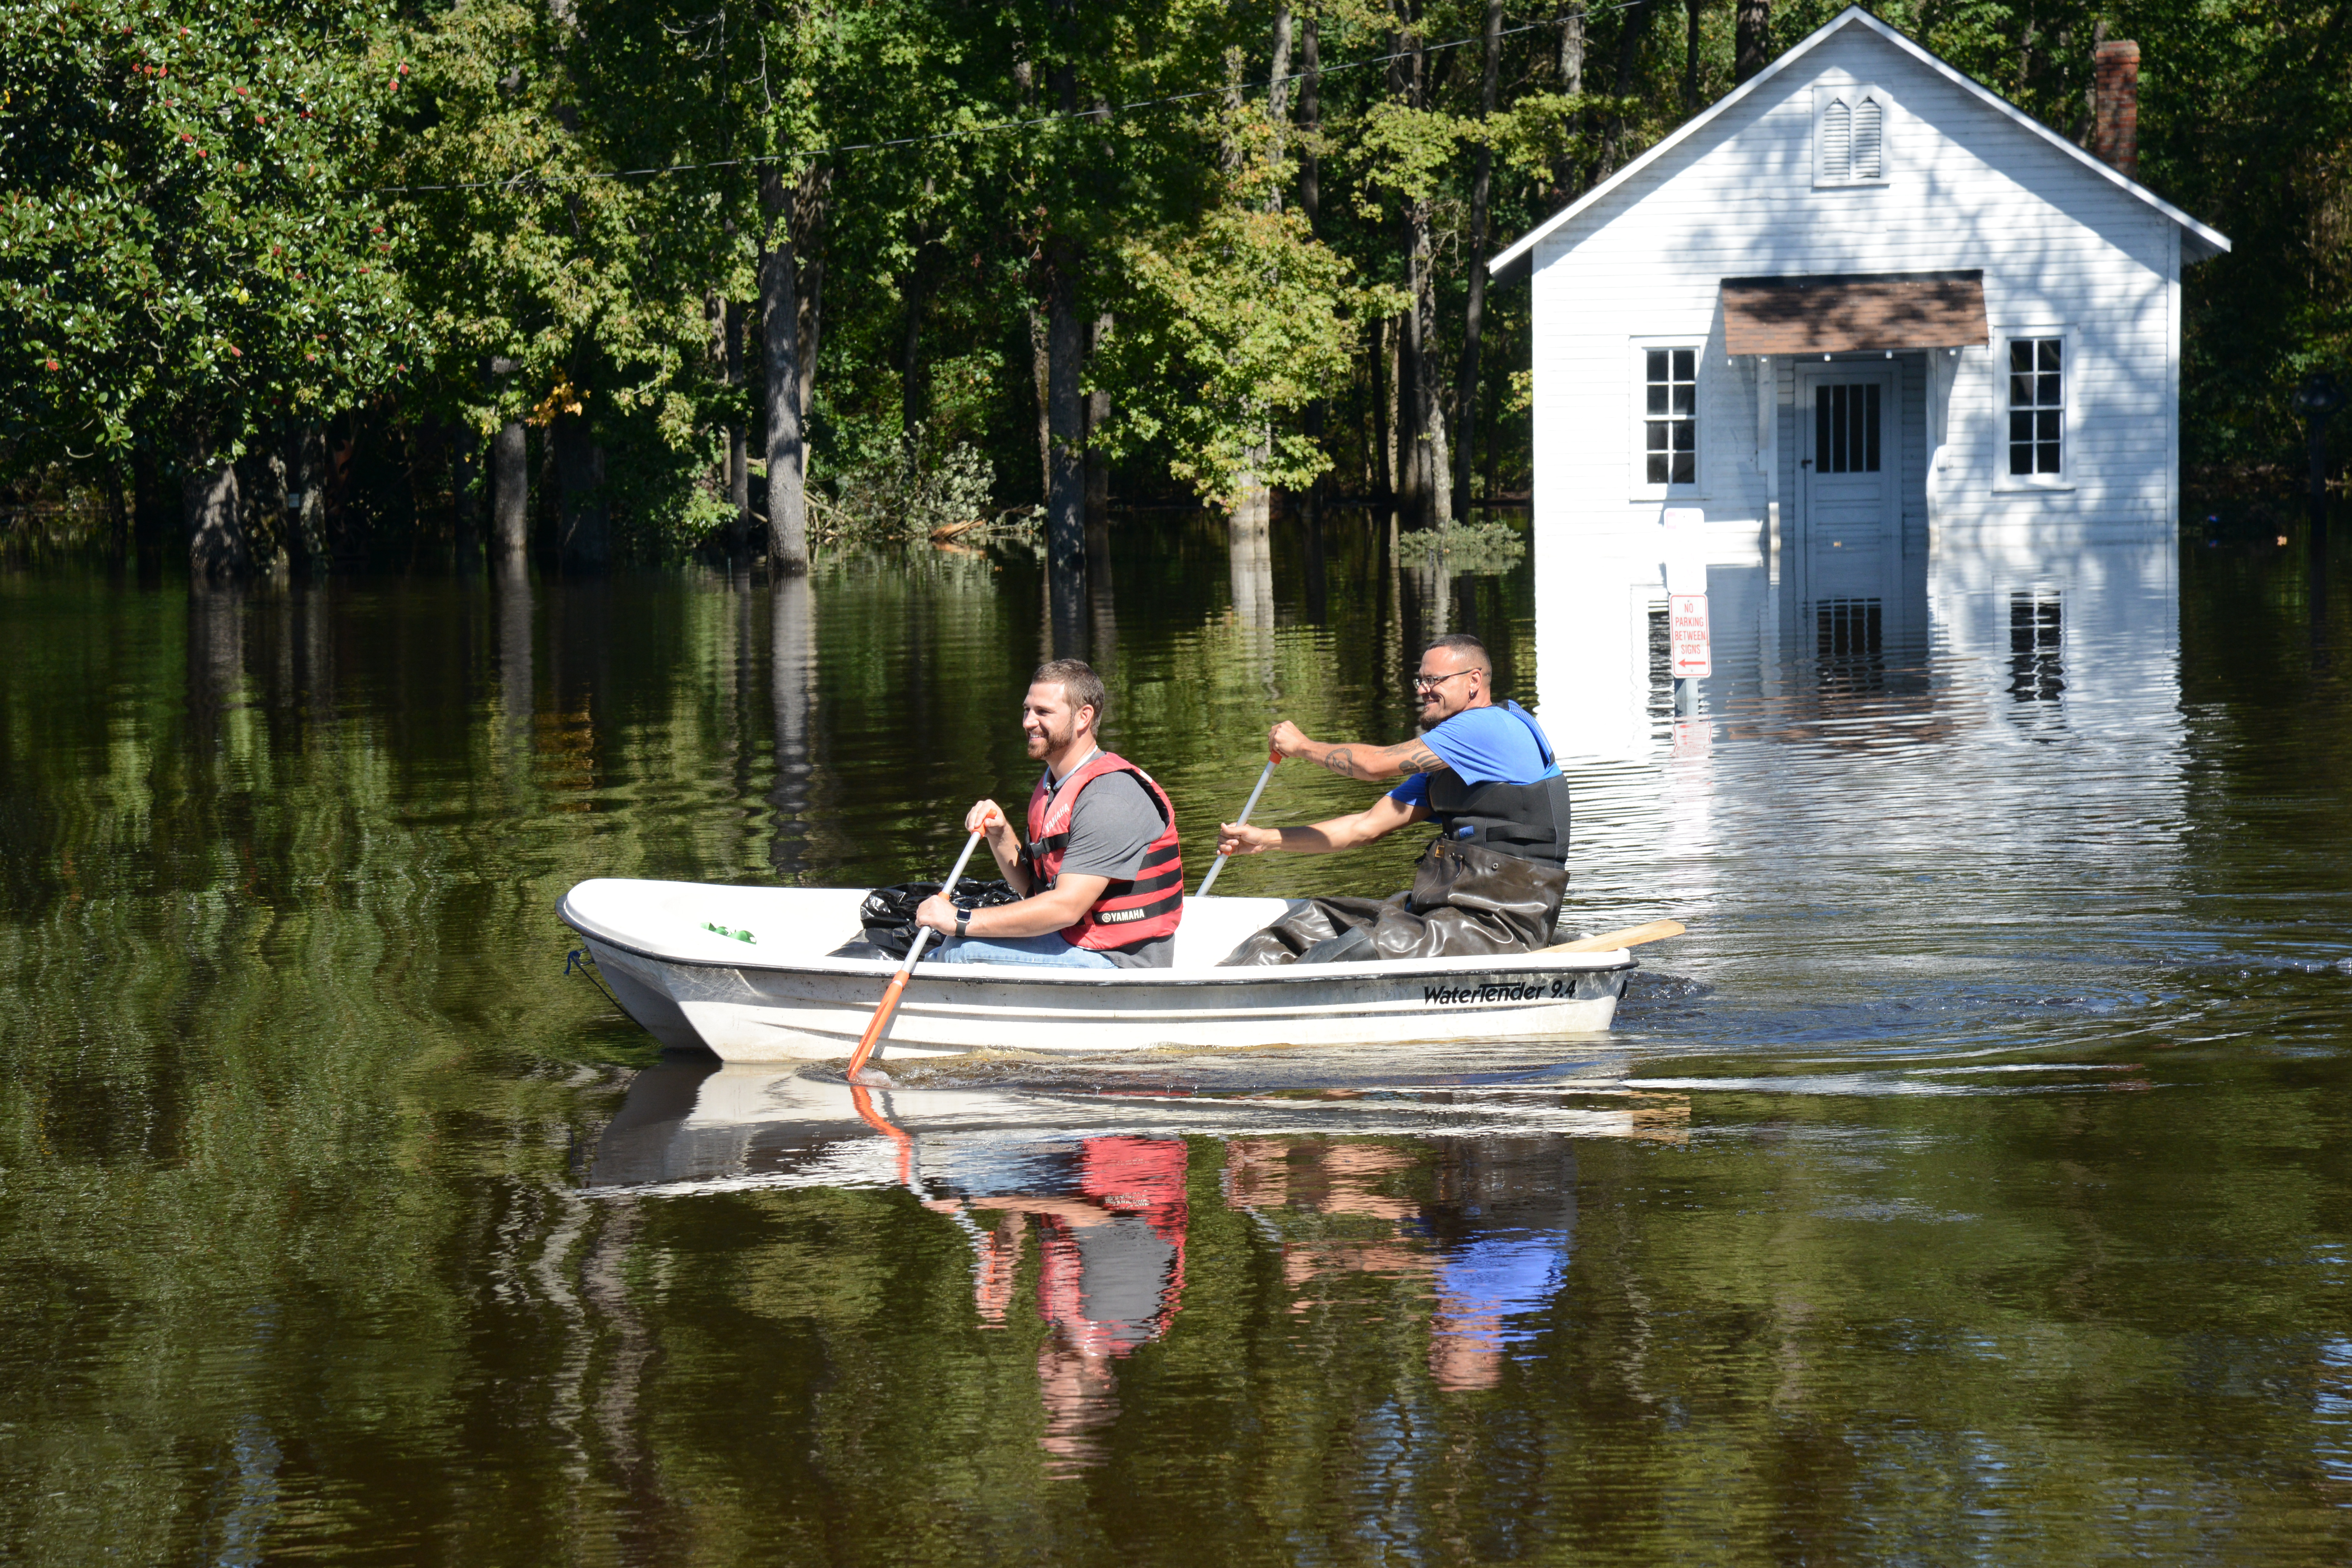 October 11, 2016. Lumberton, North Carolina. Gregory Moad left his house in Lumberton when the waters began to rise, and later realized he’d be unable to return to retrieve clothes and necessities on foot or by car, so he borrowed a boat. His friend Keith Cummings helped row Gregory over to his house to climb in, and get some essentials; and despite the unusual and difficult circumstances, the two were in good spirits as they rowed back to high ground. 